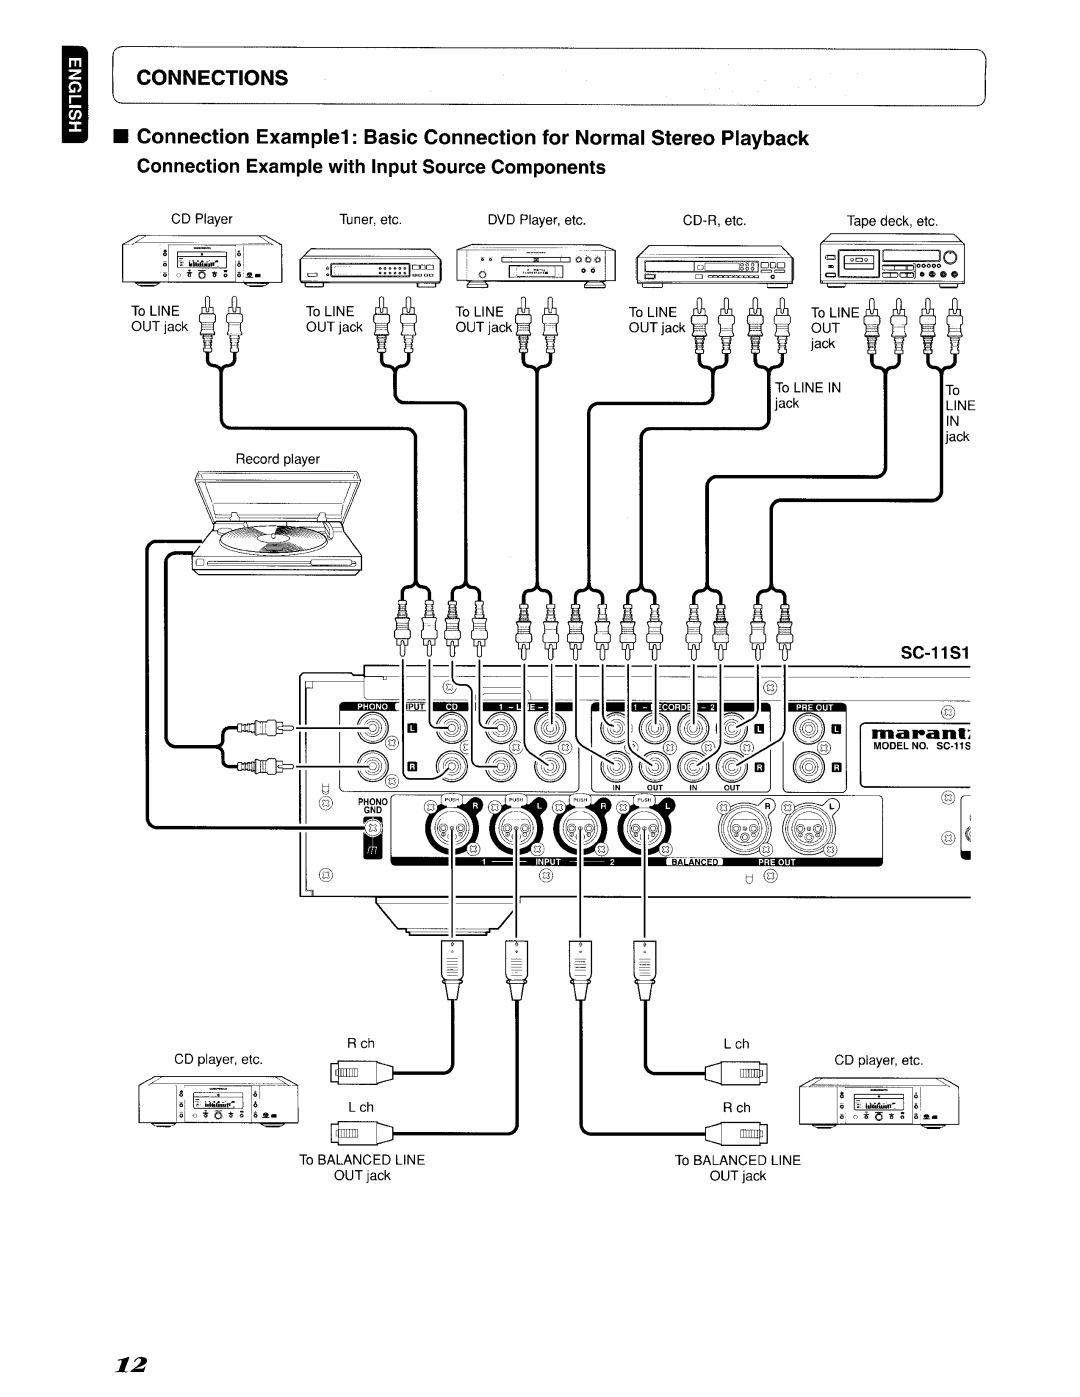 Marantz 642SC11S1 manual Connections, Connection Example with Input Source Components, SC-11S1 